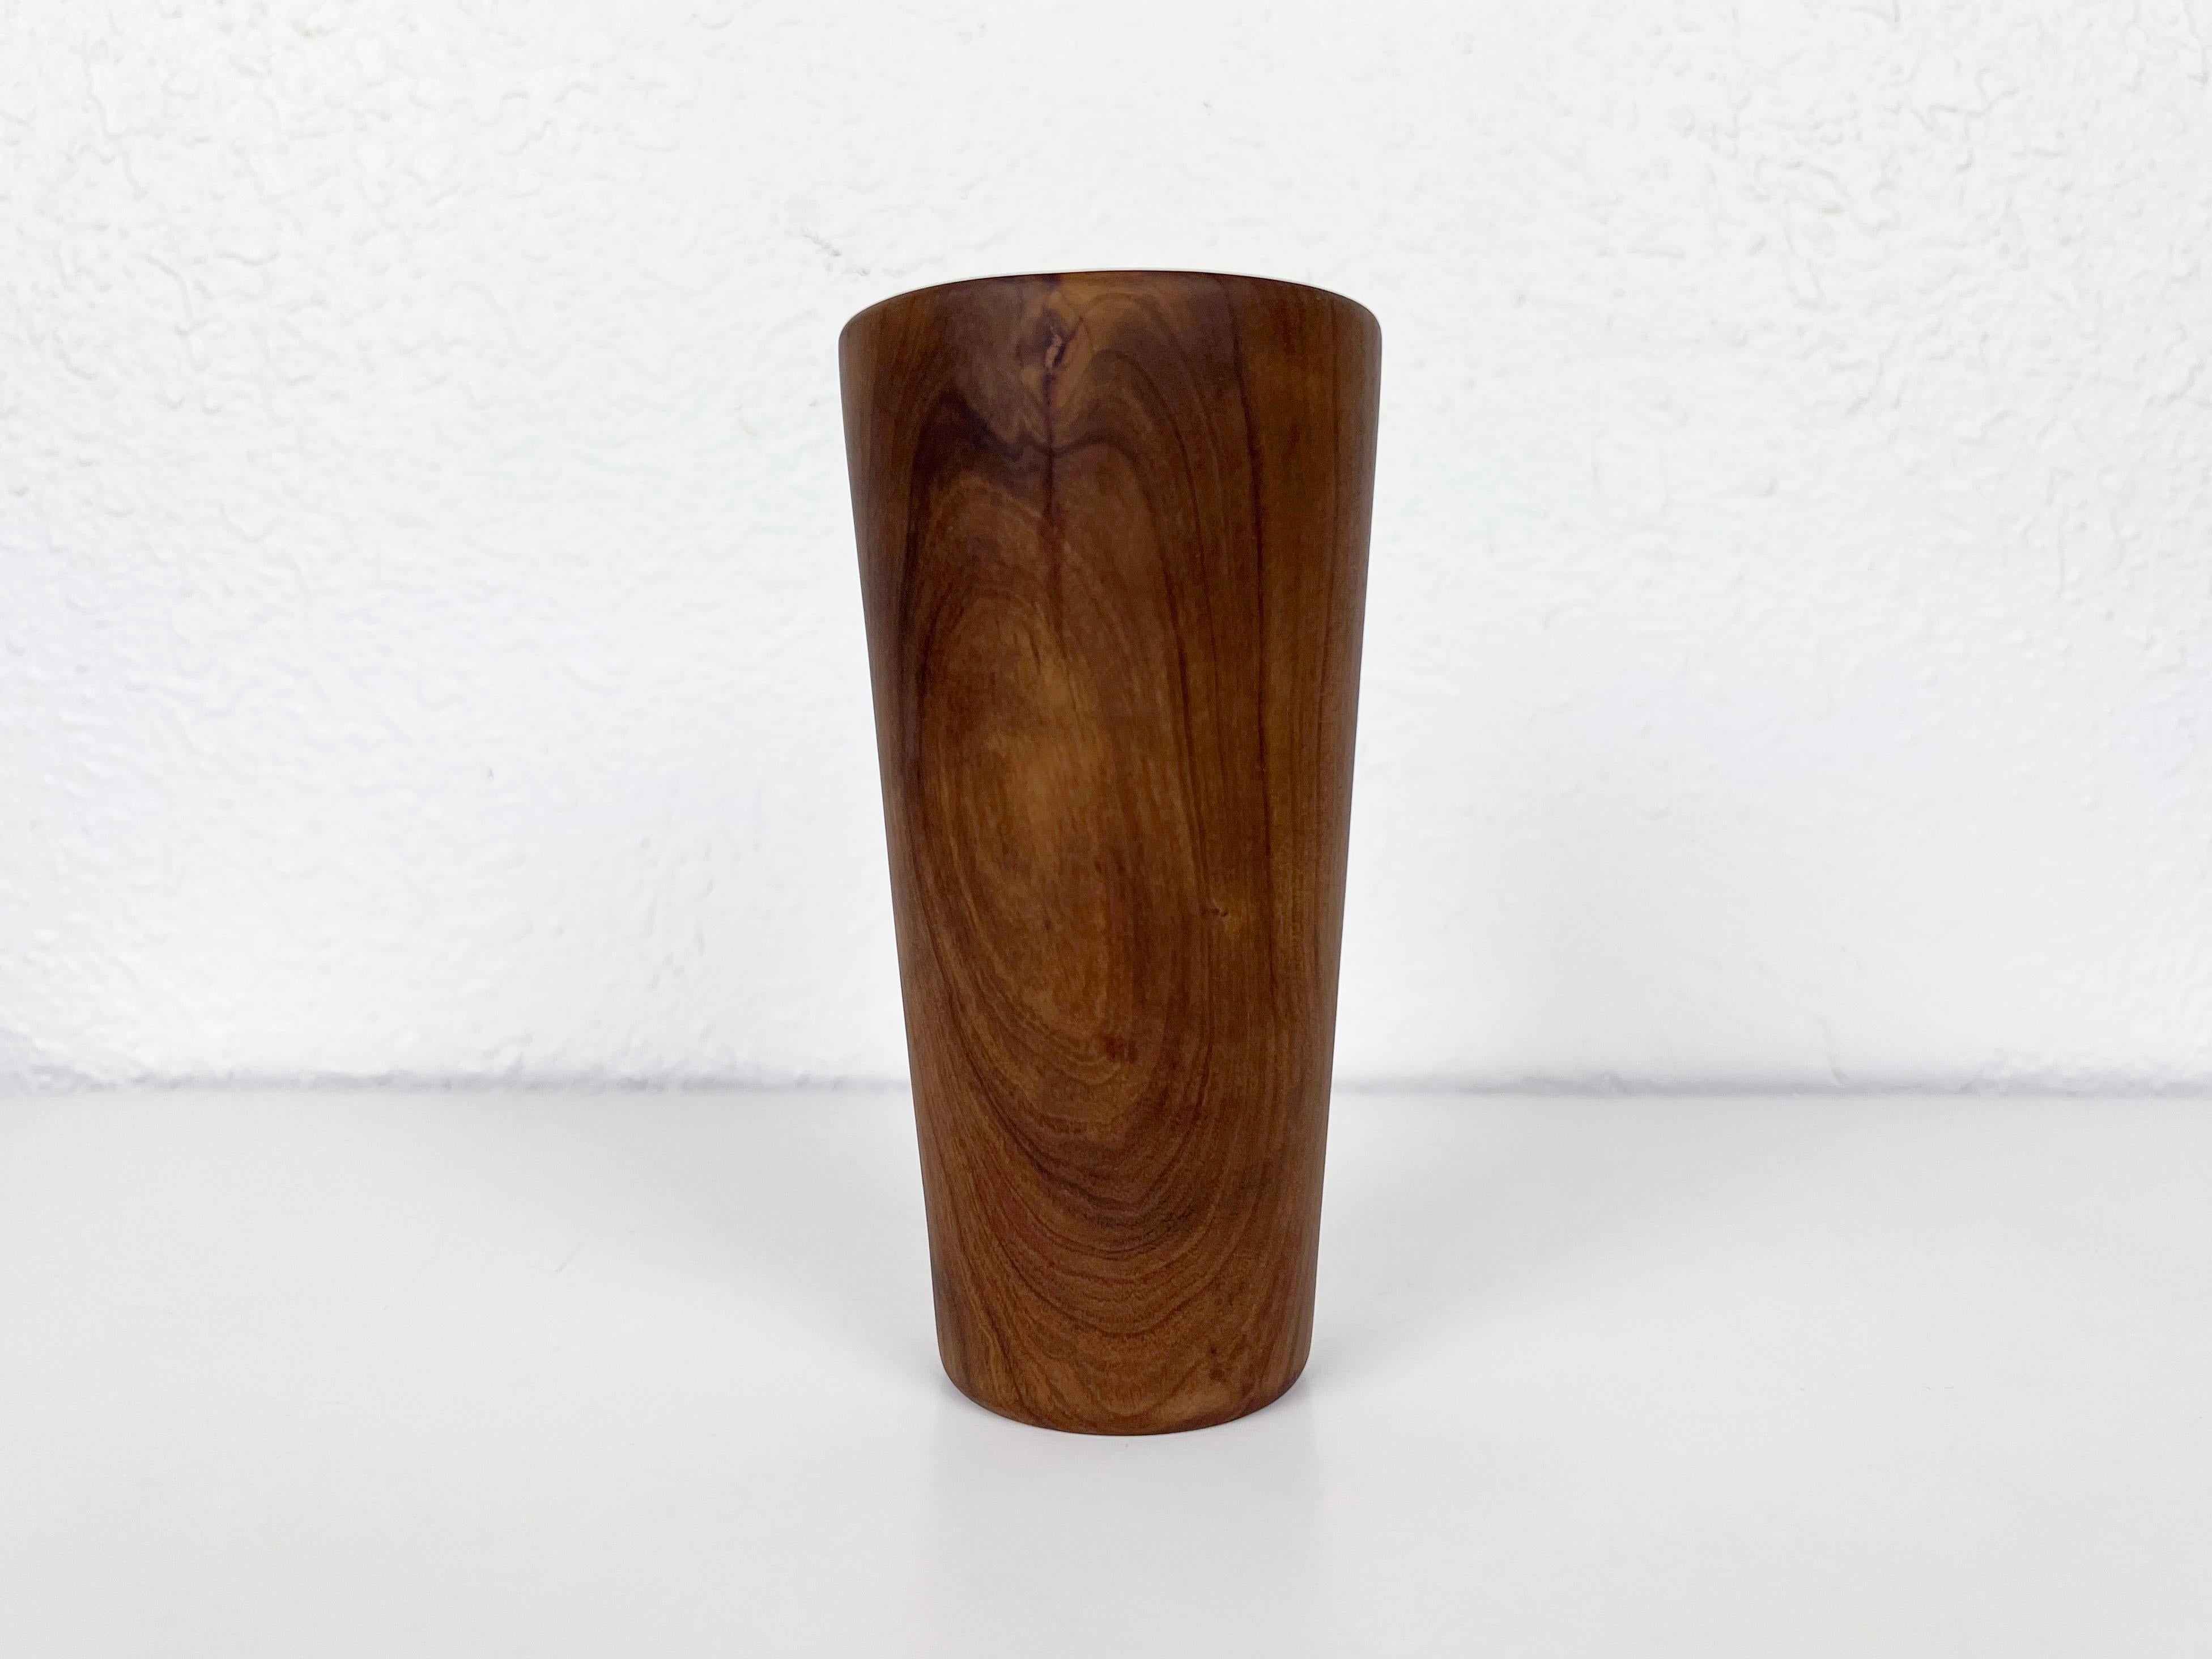 Vintage hand-turned wooden cup crafted from a solid block of teak. Beautiful figured grain contrast and form. 

Maker: Unknown

Year: 1960s

Style: Mid-Century Modern / Minimalist

Dimensions: 5.75